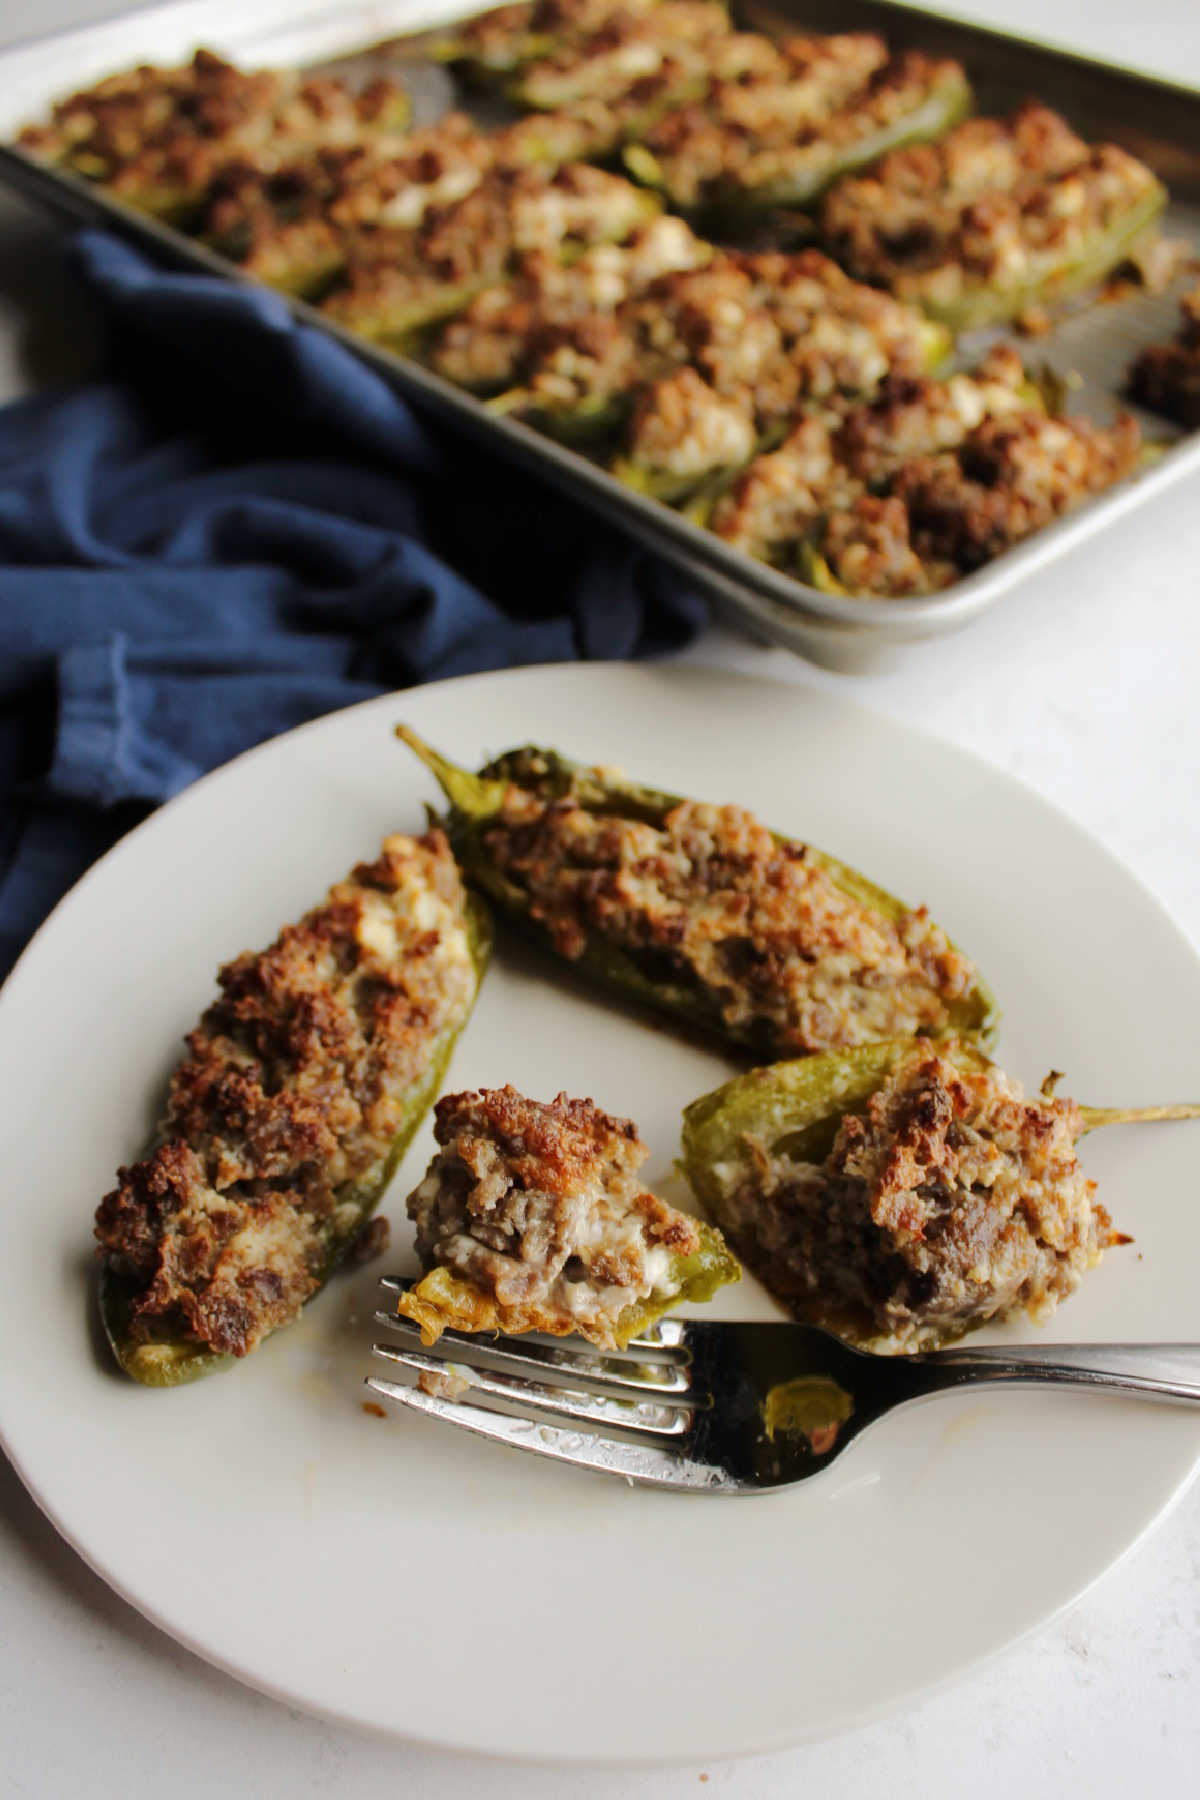 Bite of sausage and cream cheese stuffed jalapeno pepper on fork, ready to eat.